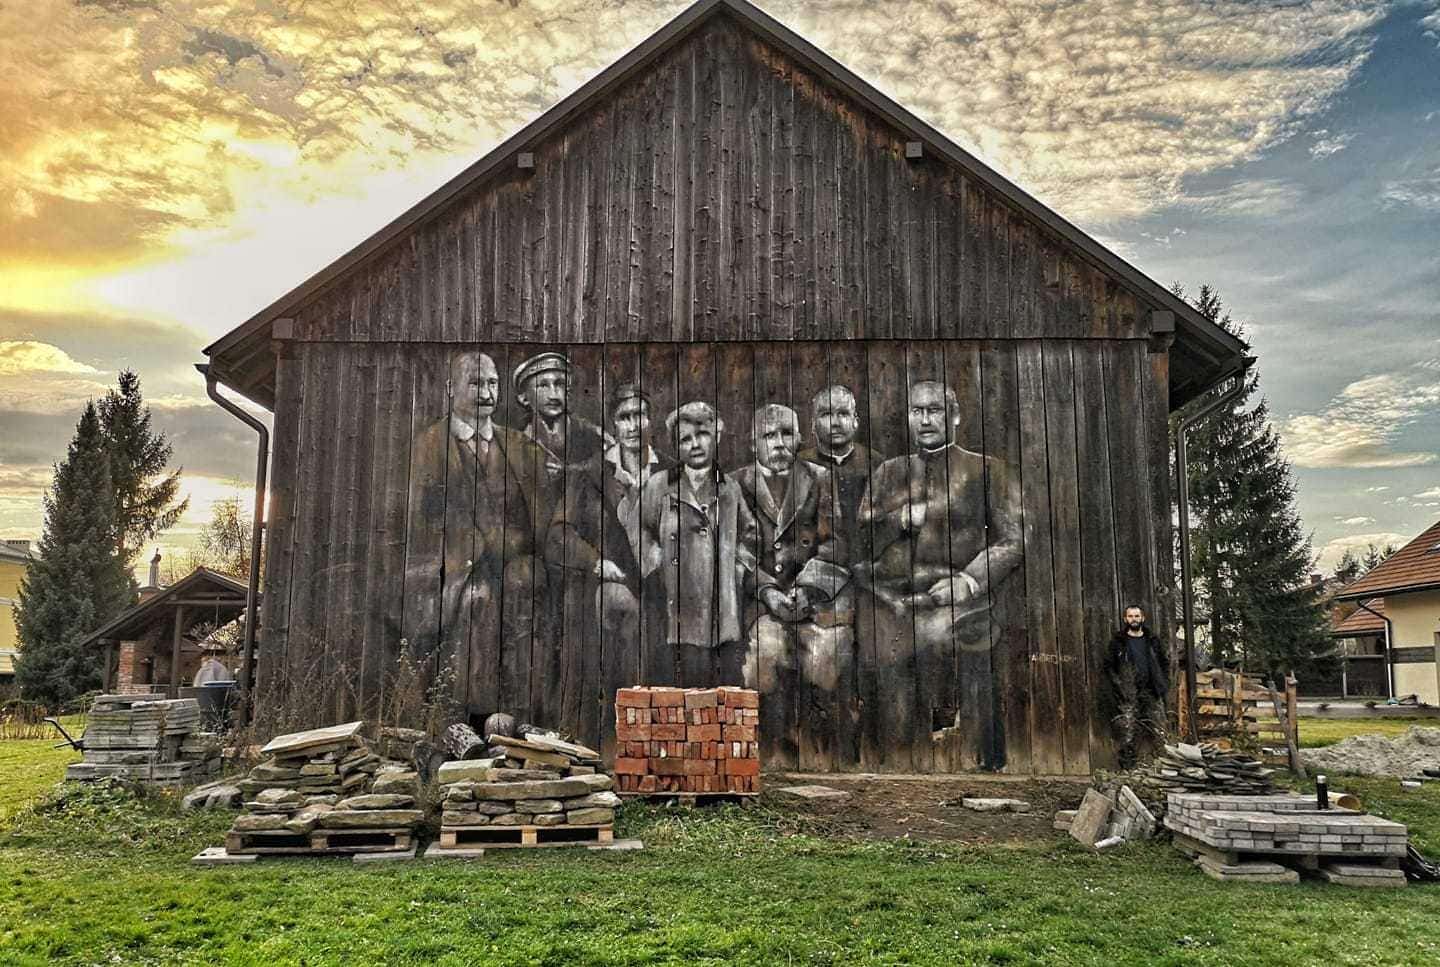 old-family-portraits-immortalized-on-the-walls-of-the-barn-and-sheds